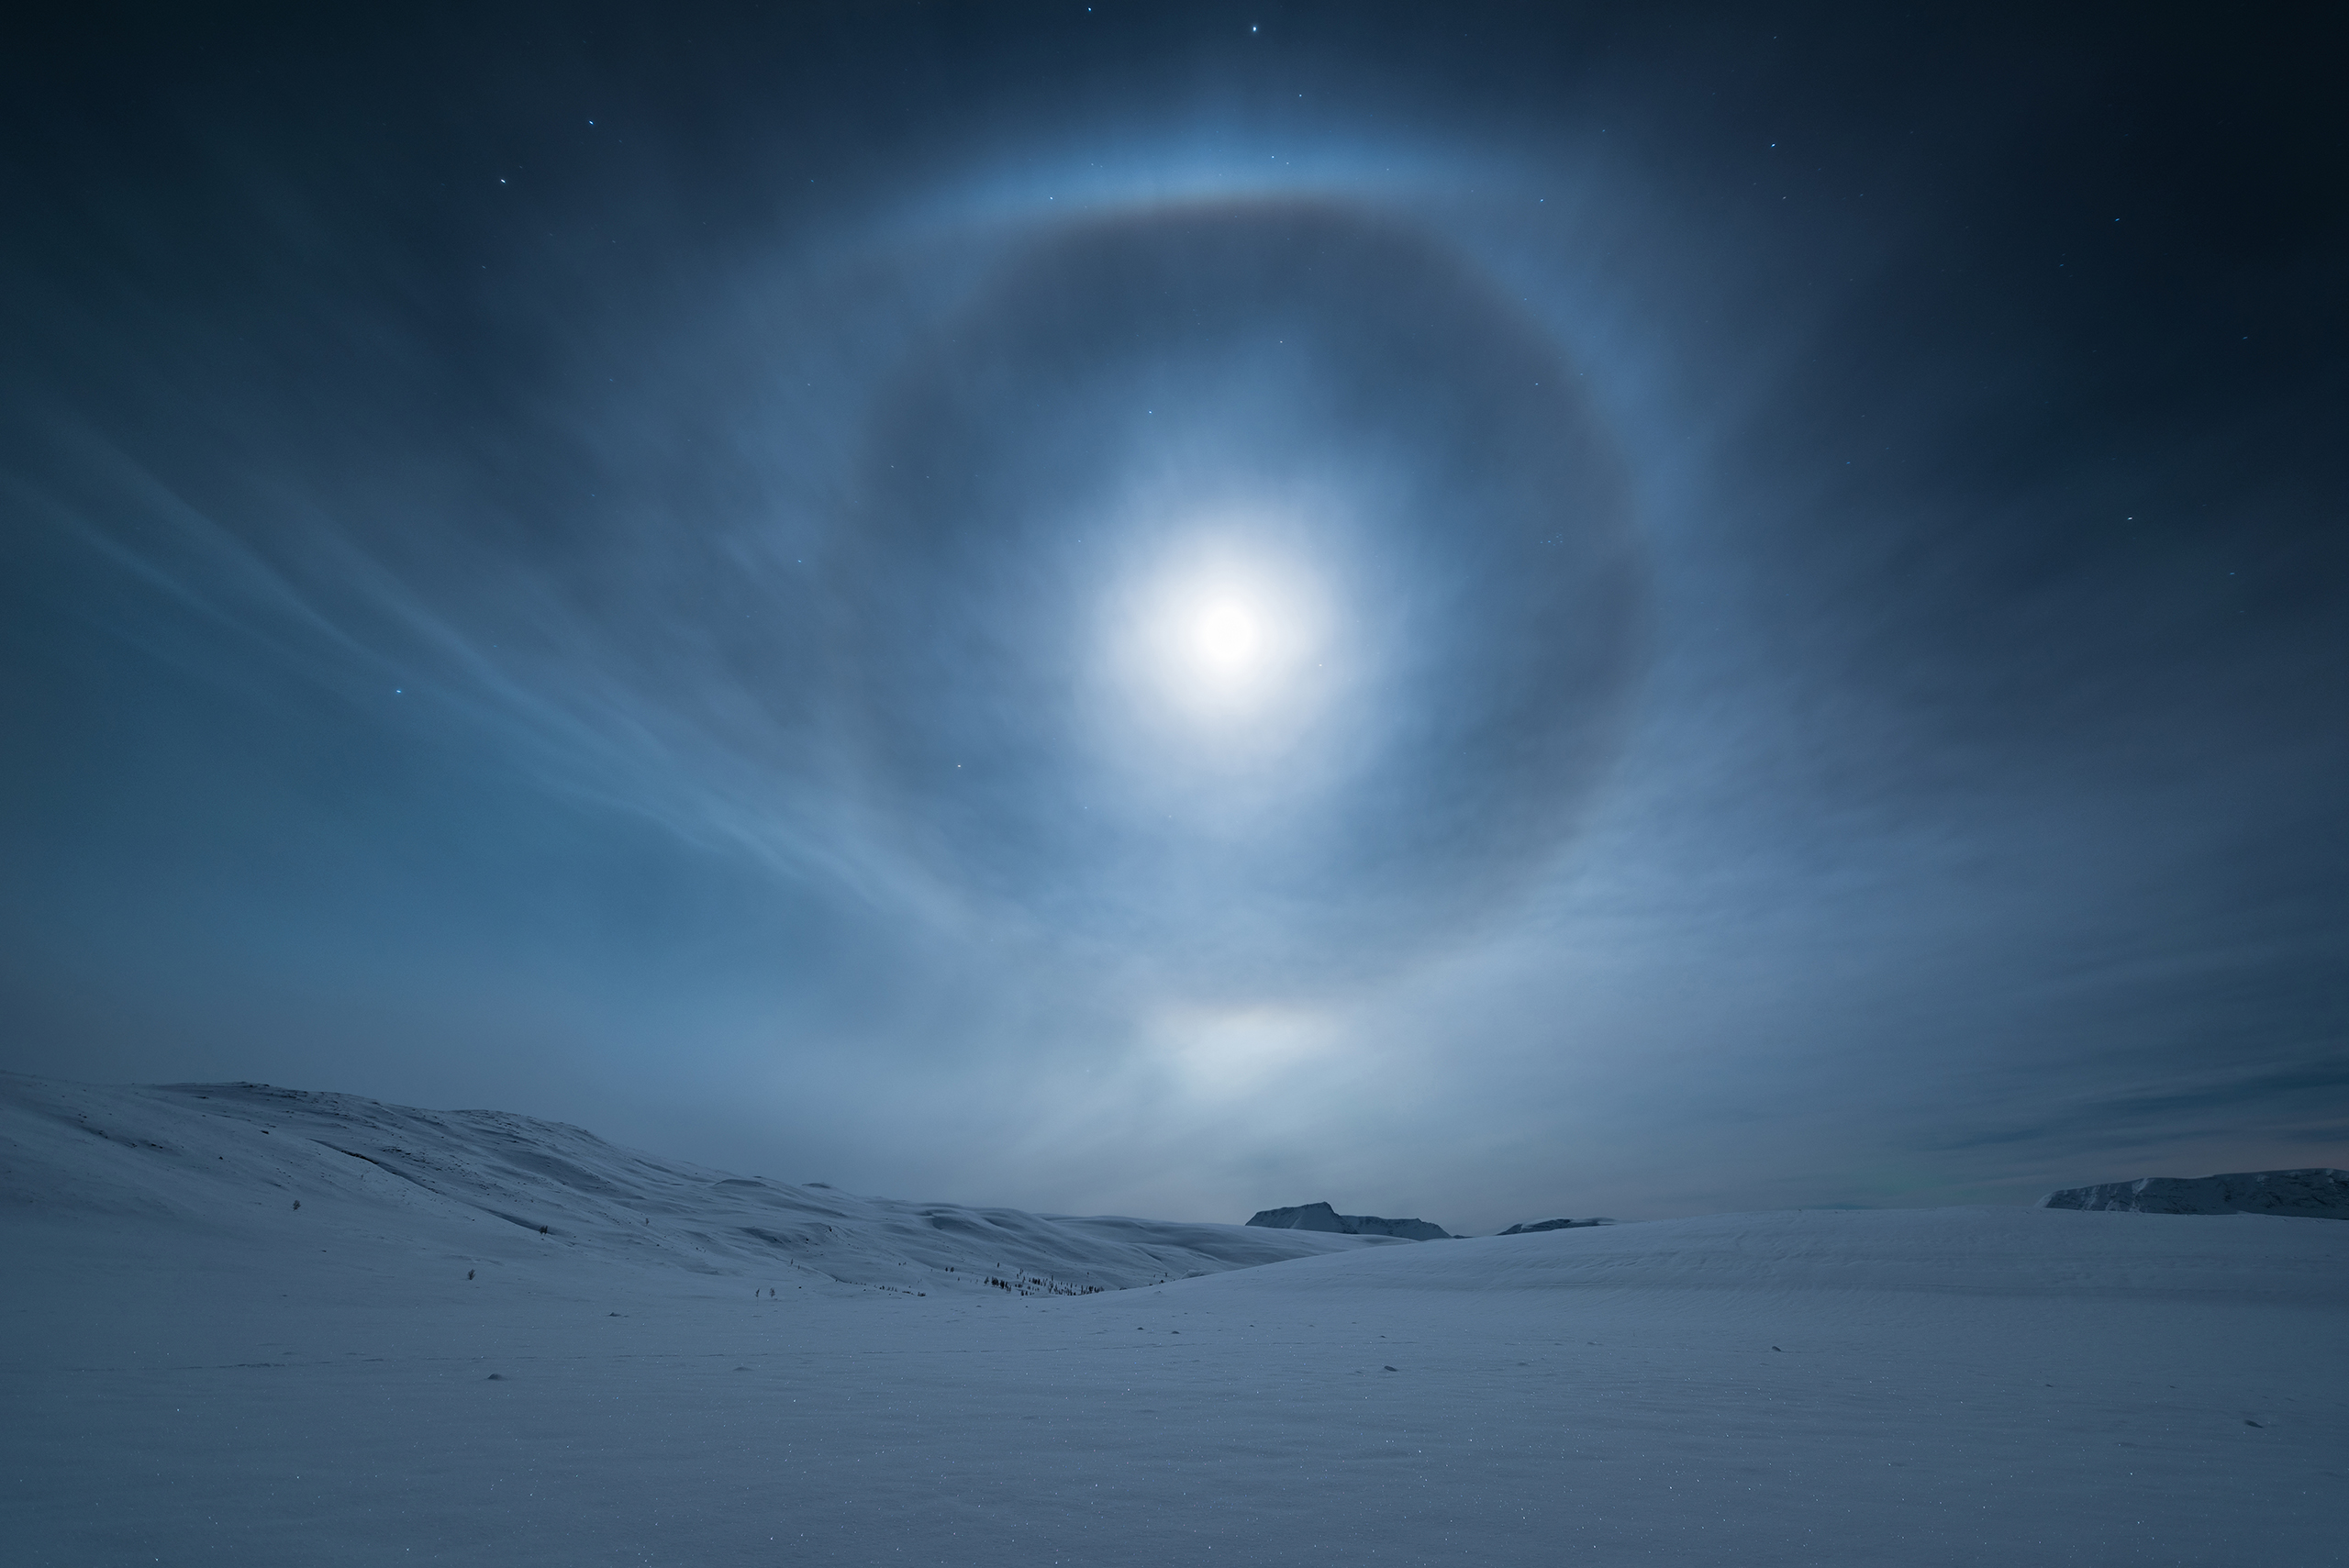 A mesmerizing lunar halo forms around our natural satellite, the Moon, in the night sky above Norway. The halo, also known as a moon ring or winter halo, is an optical phenomenon created when moonlight is refracted in numerous ice crystals suspended in the atmosphere.